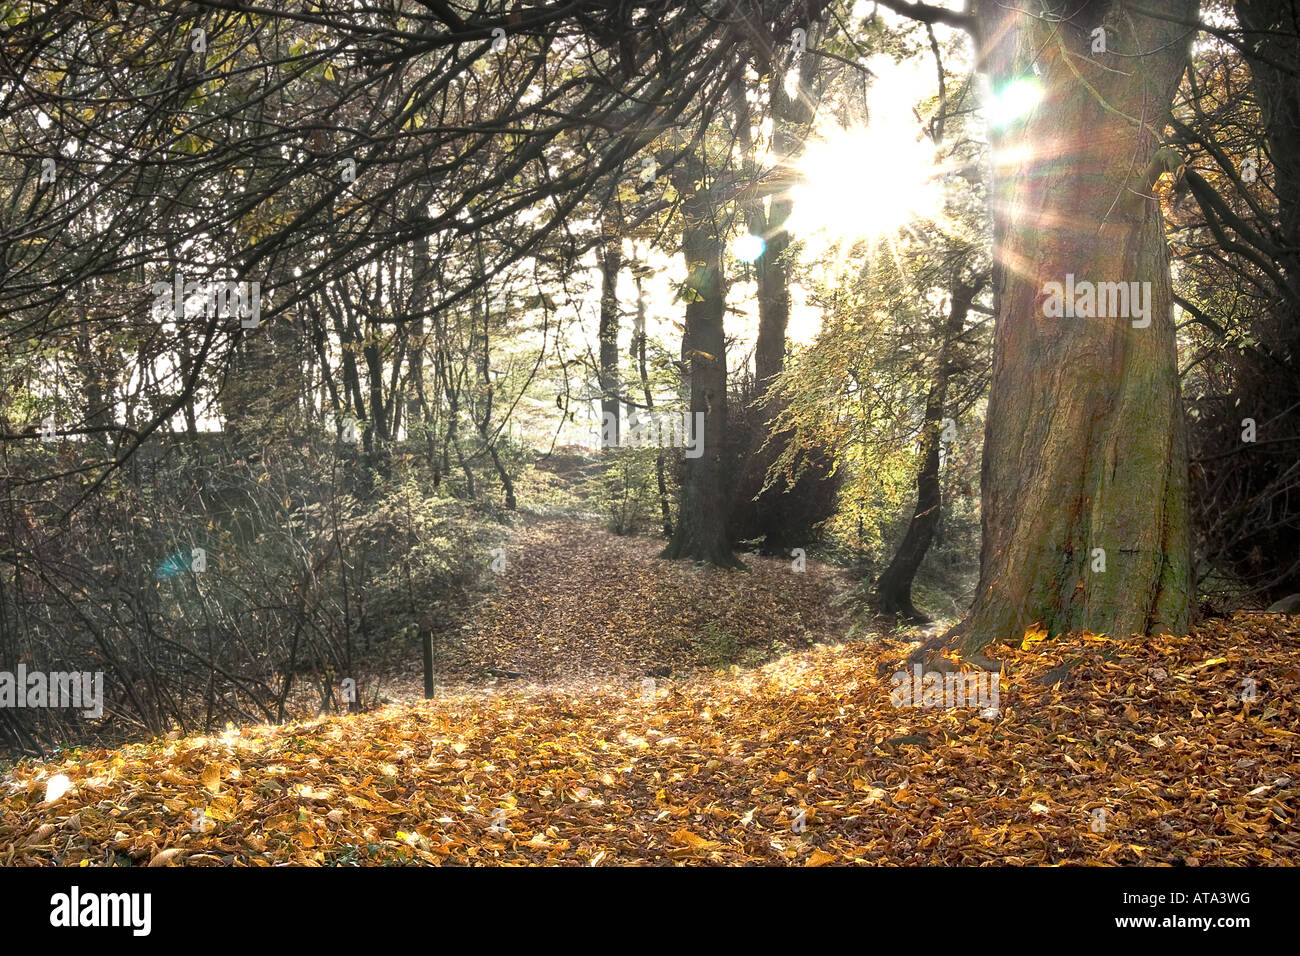 Idyllic woodland scene with the sun shining through the glade and autumnal leaves in the foreground, Bury UK Stock Photo